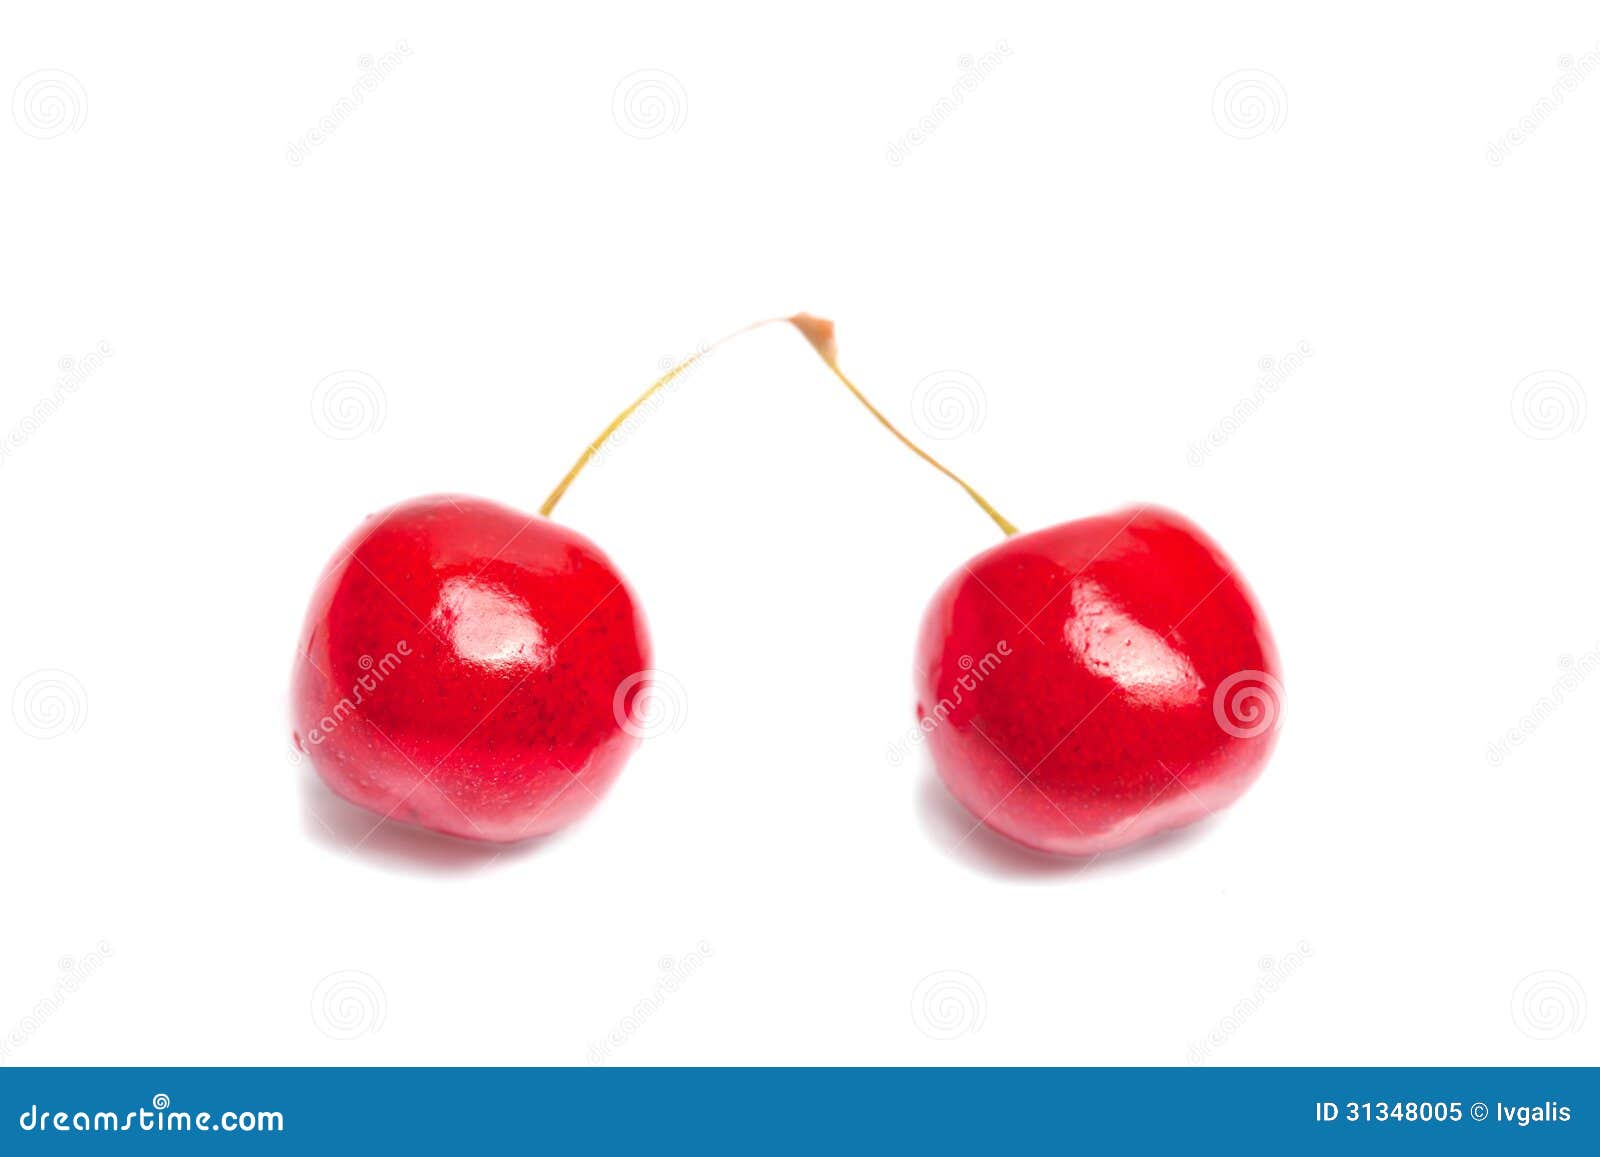 Pair of cherries stock image. Image of agriculture, nutrition - 31348005